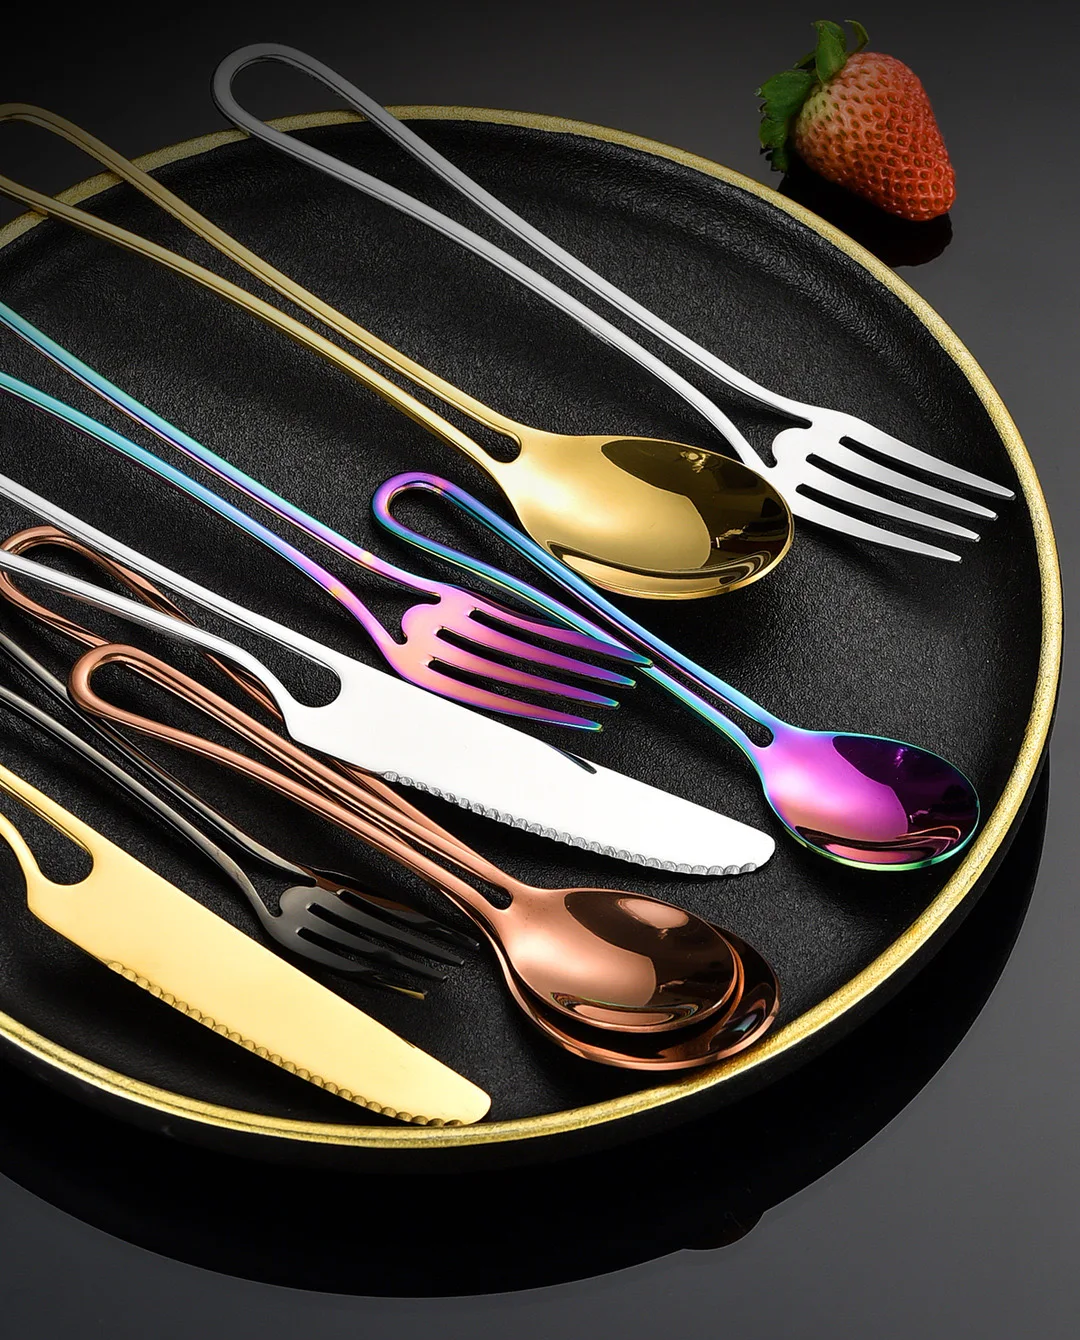 Stylish Tablescape Idea Using Minimalist Flatware Shiny Stainless Steel Knives Forks And Spoons In Gold Black Rose Gold Silver And Iridescent Rainbow Colors